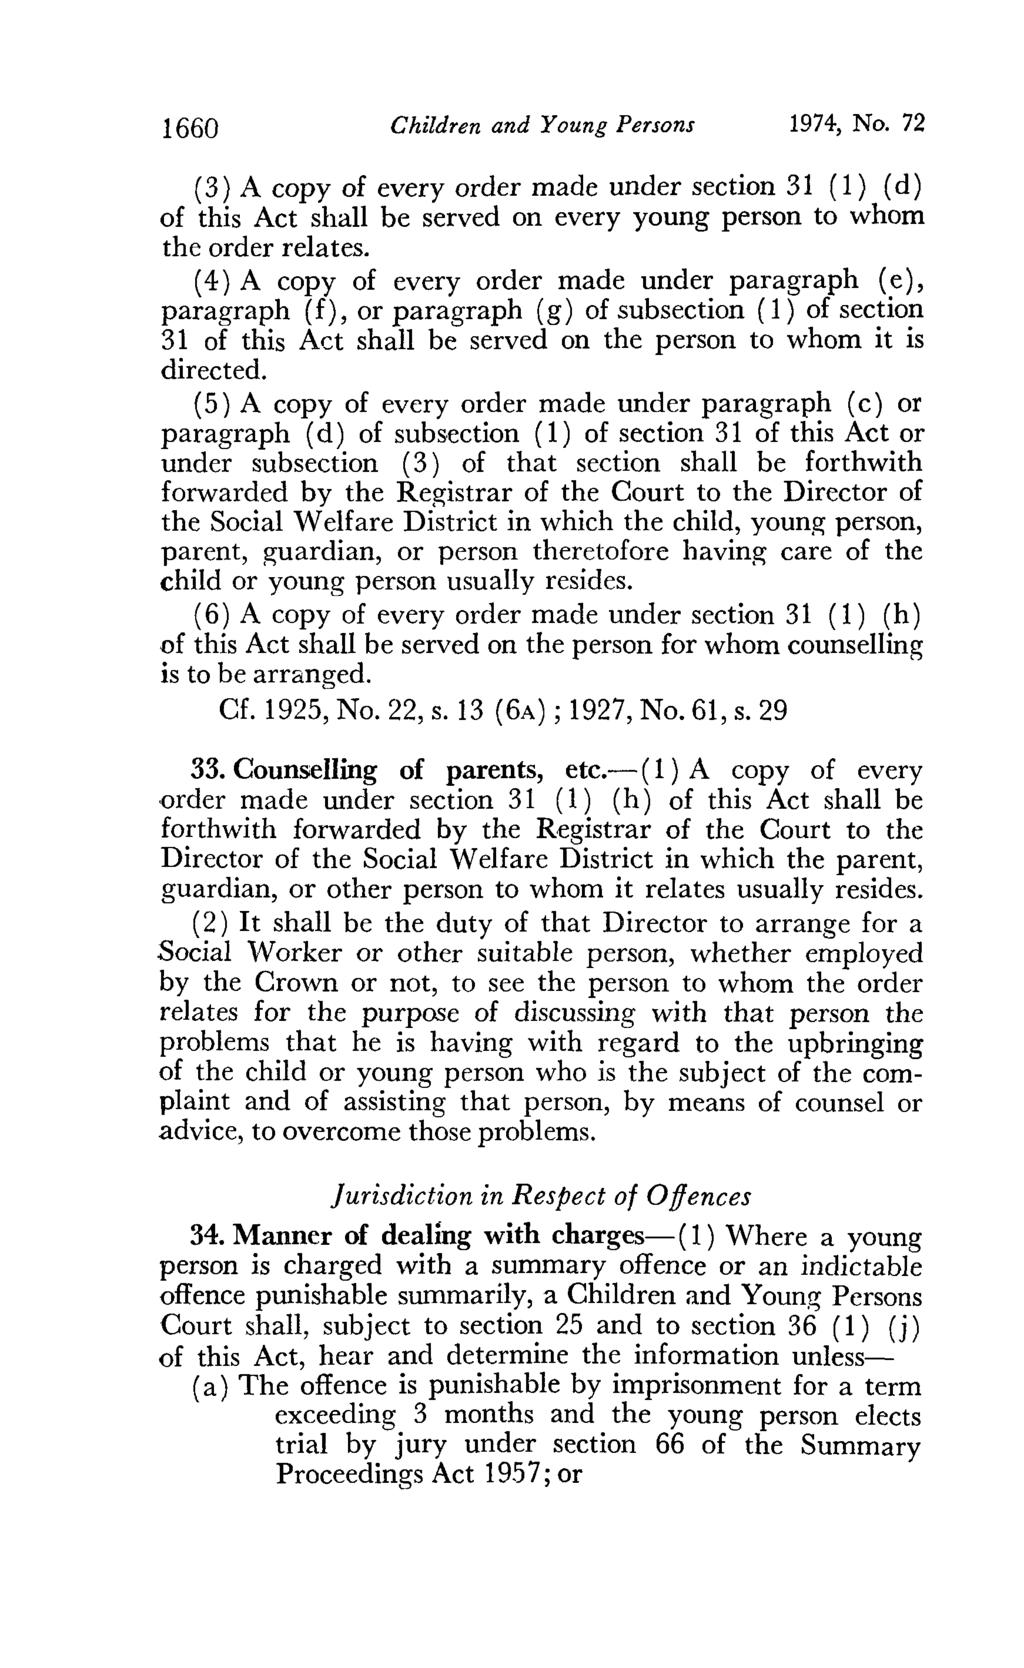 1660 Children and Young Persons 1974, No. 72 ( 3) A copy of every order made under section 31 (1) (d) of this Act shall be served on every young person to whom the order relates.